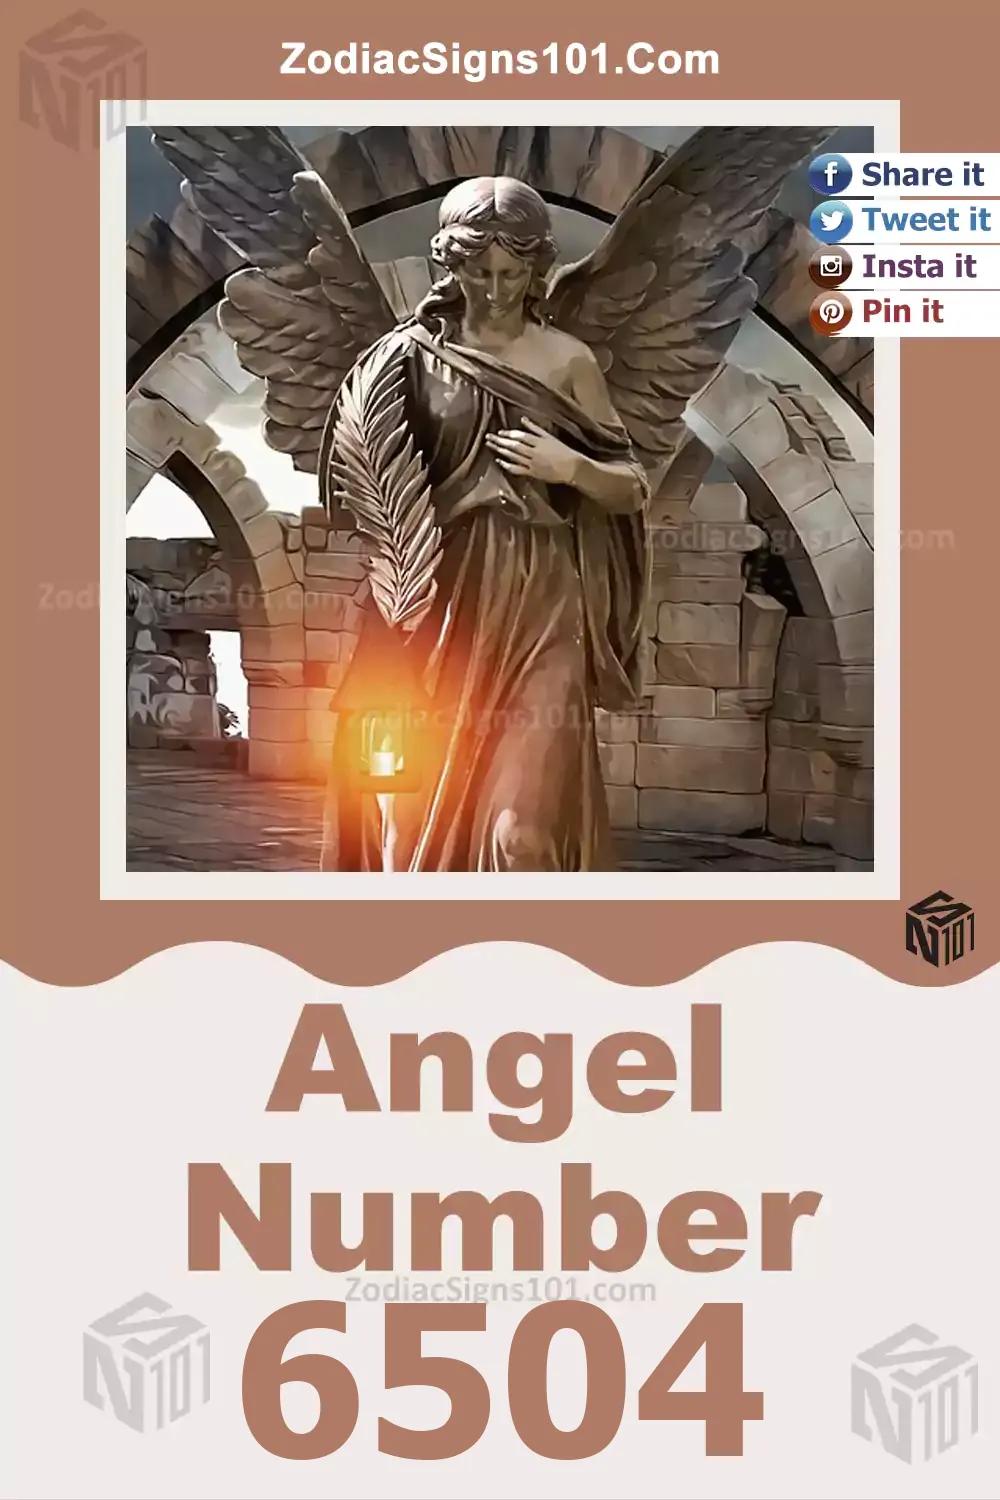 6504 Angel Number Meaning